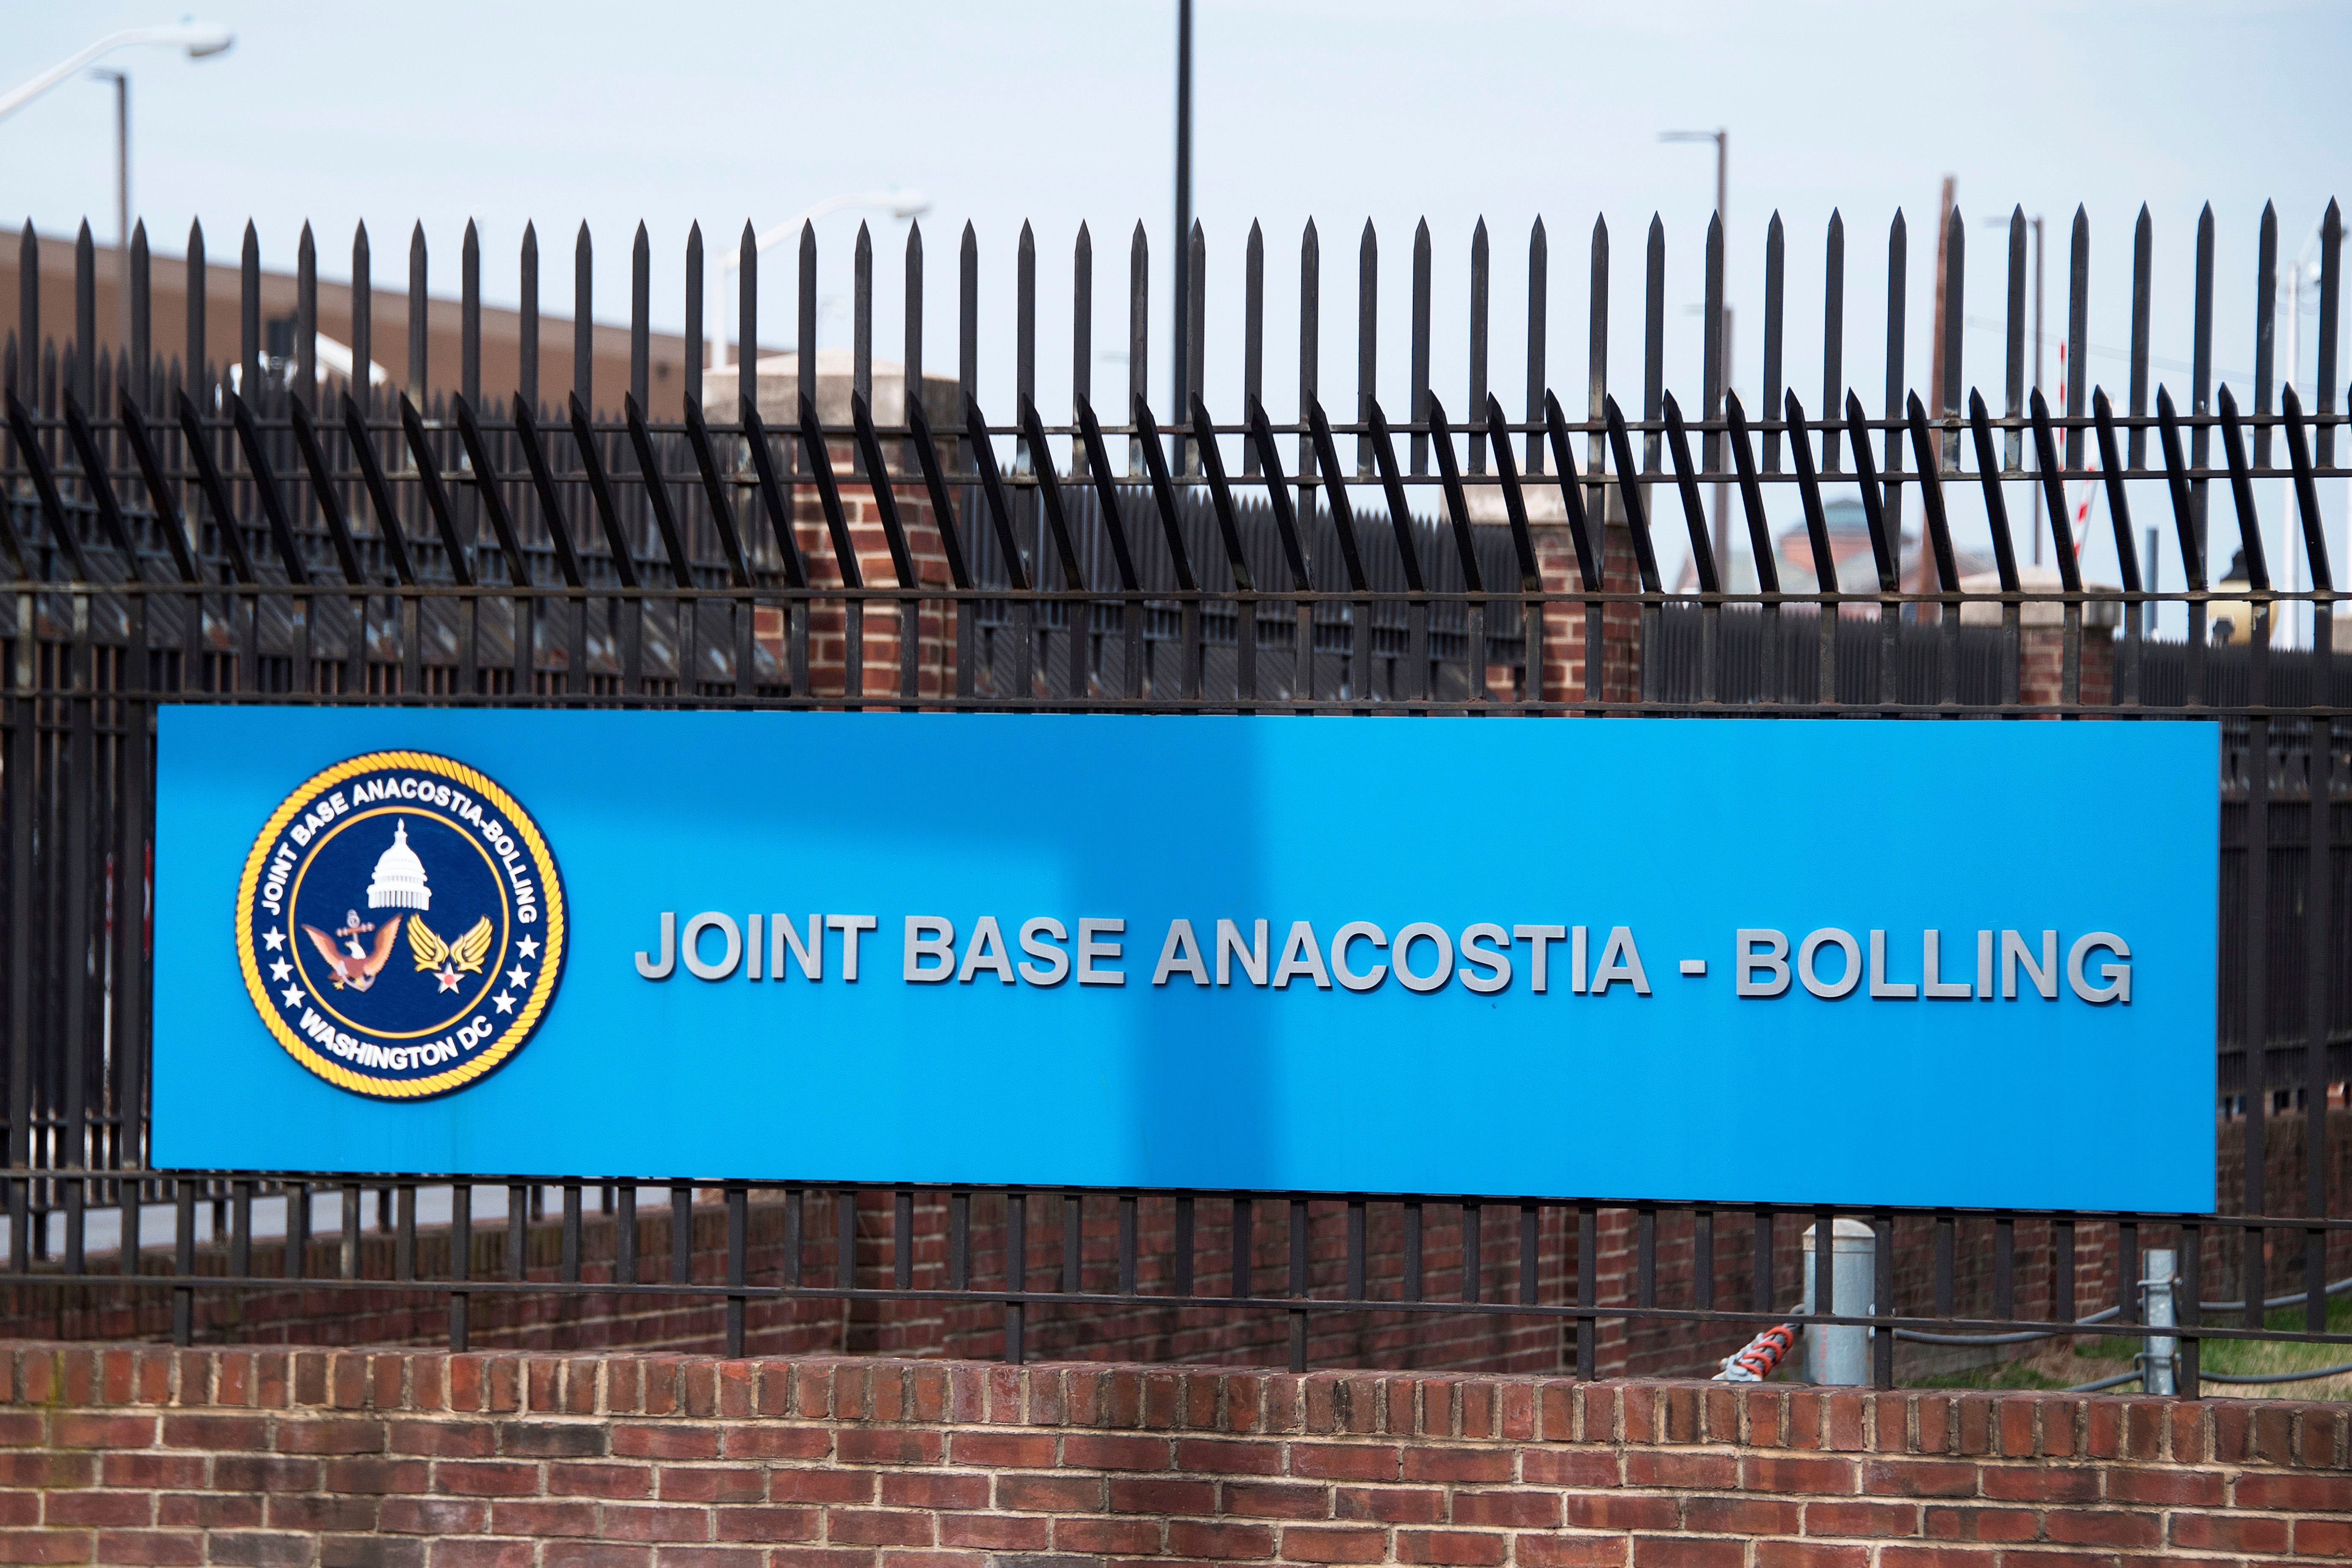 he front gate of Joint Base Anacostia-Bolling is viewed in Washington, DC, on March 27, 2018